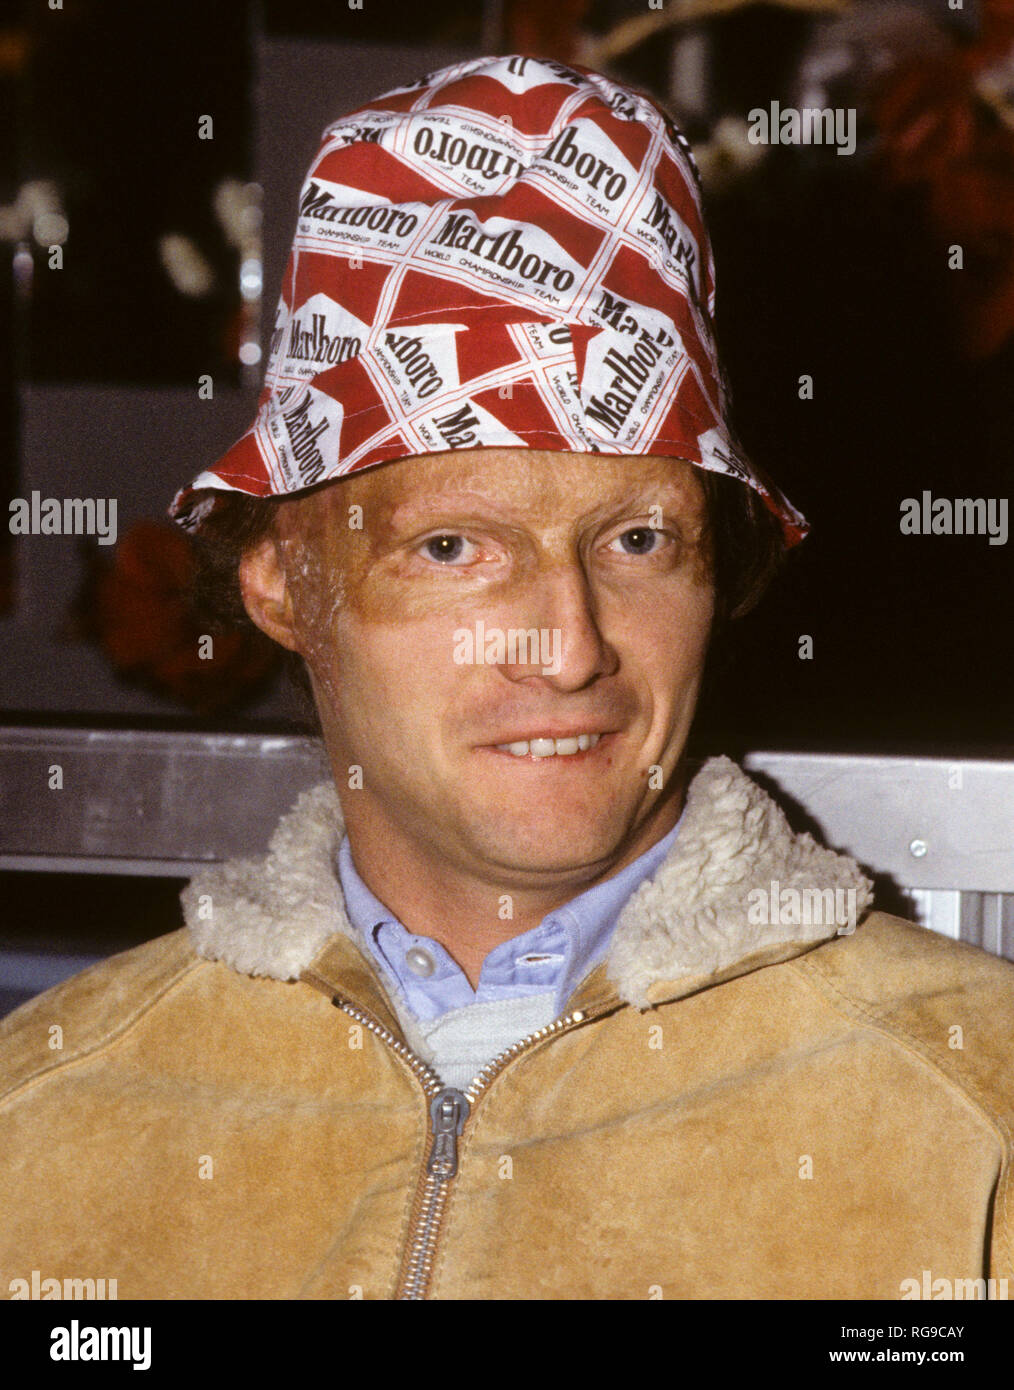 Niki lauda accident hi-res stock photography and images - Alamy